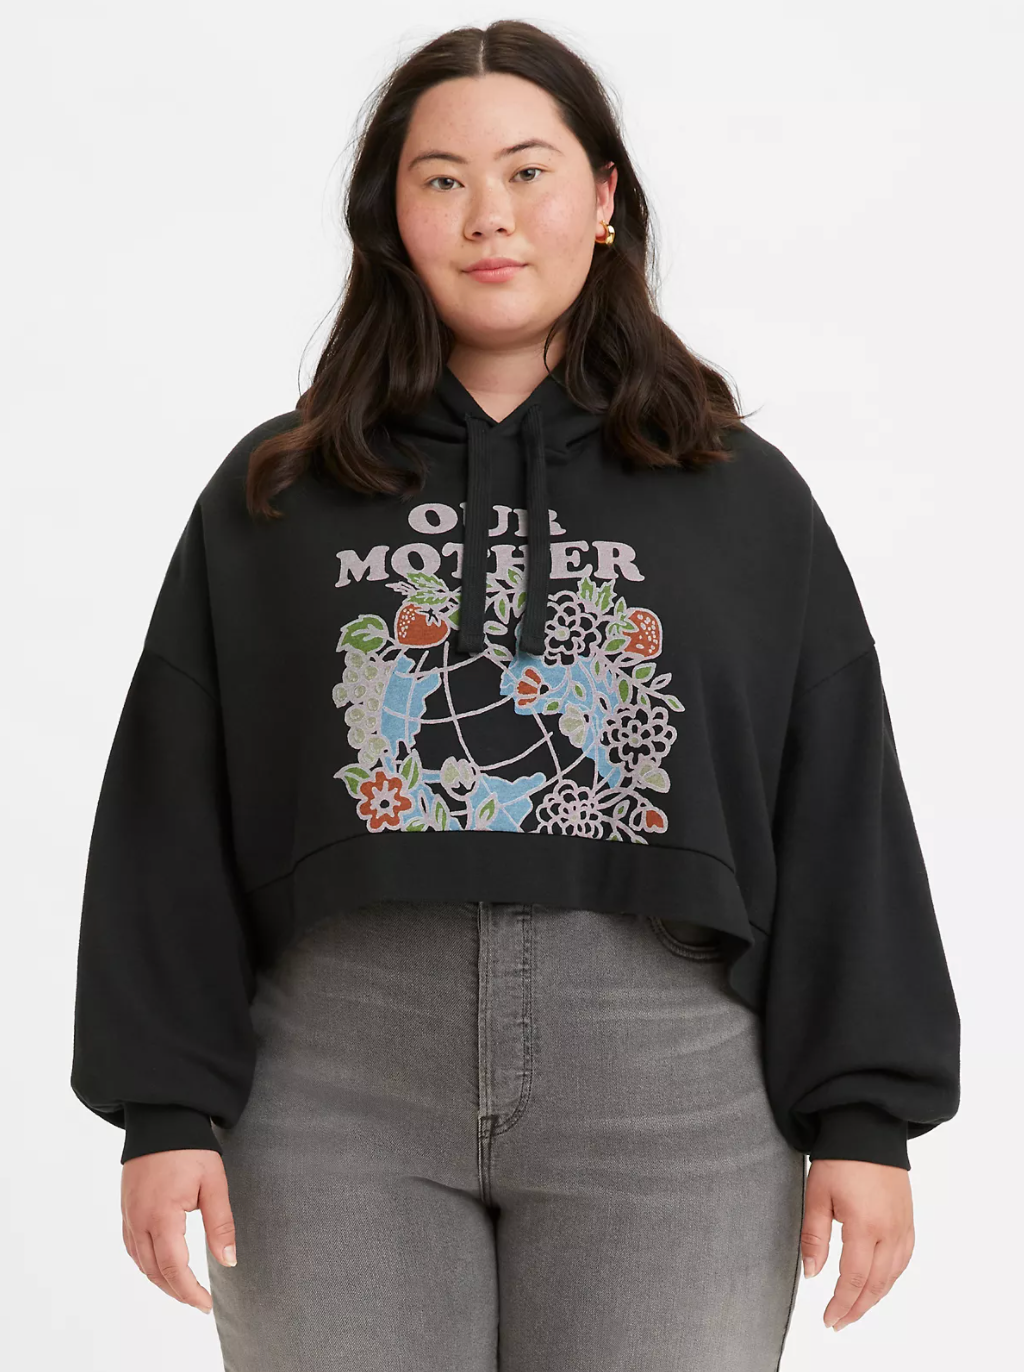 Model in black cropped hoodie with flower graphic that says 